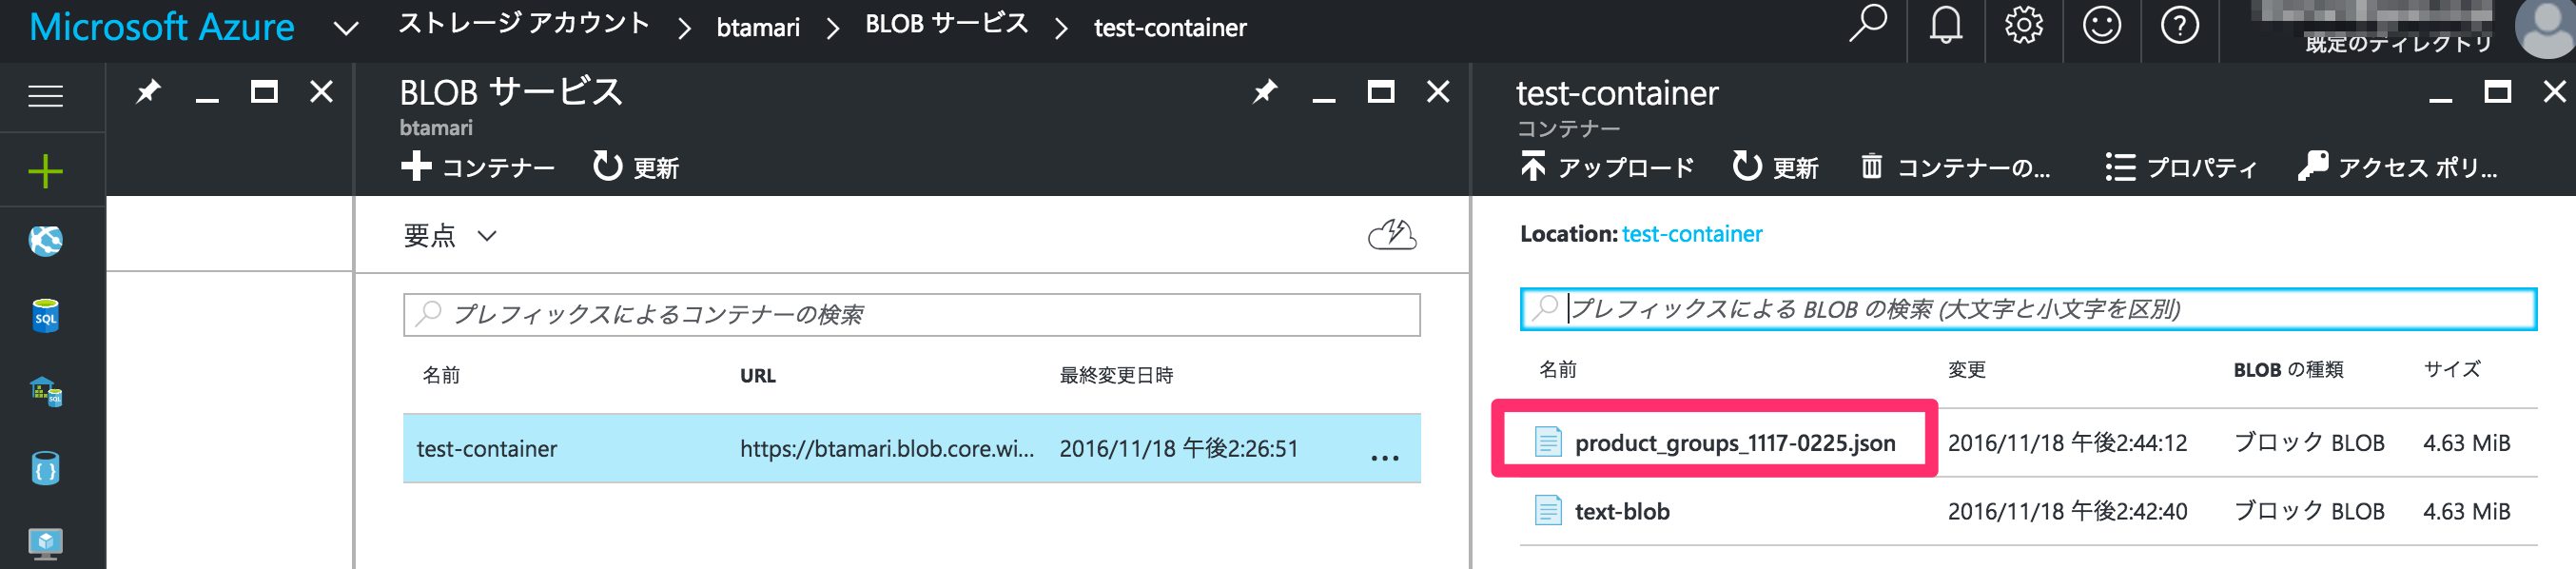 test-container_-_Microsoft_Azure.png